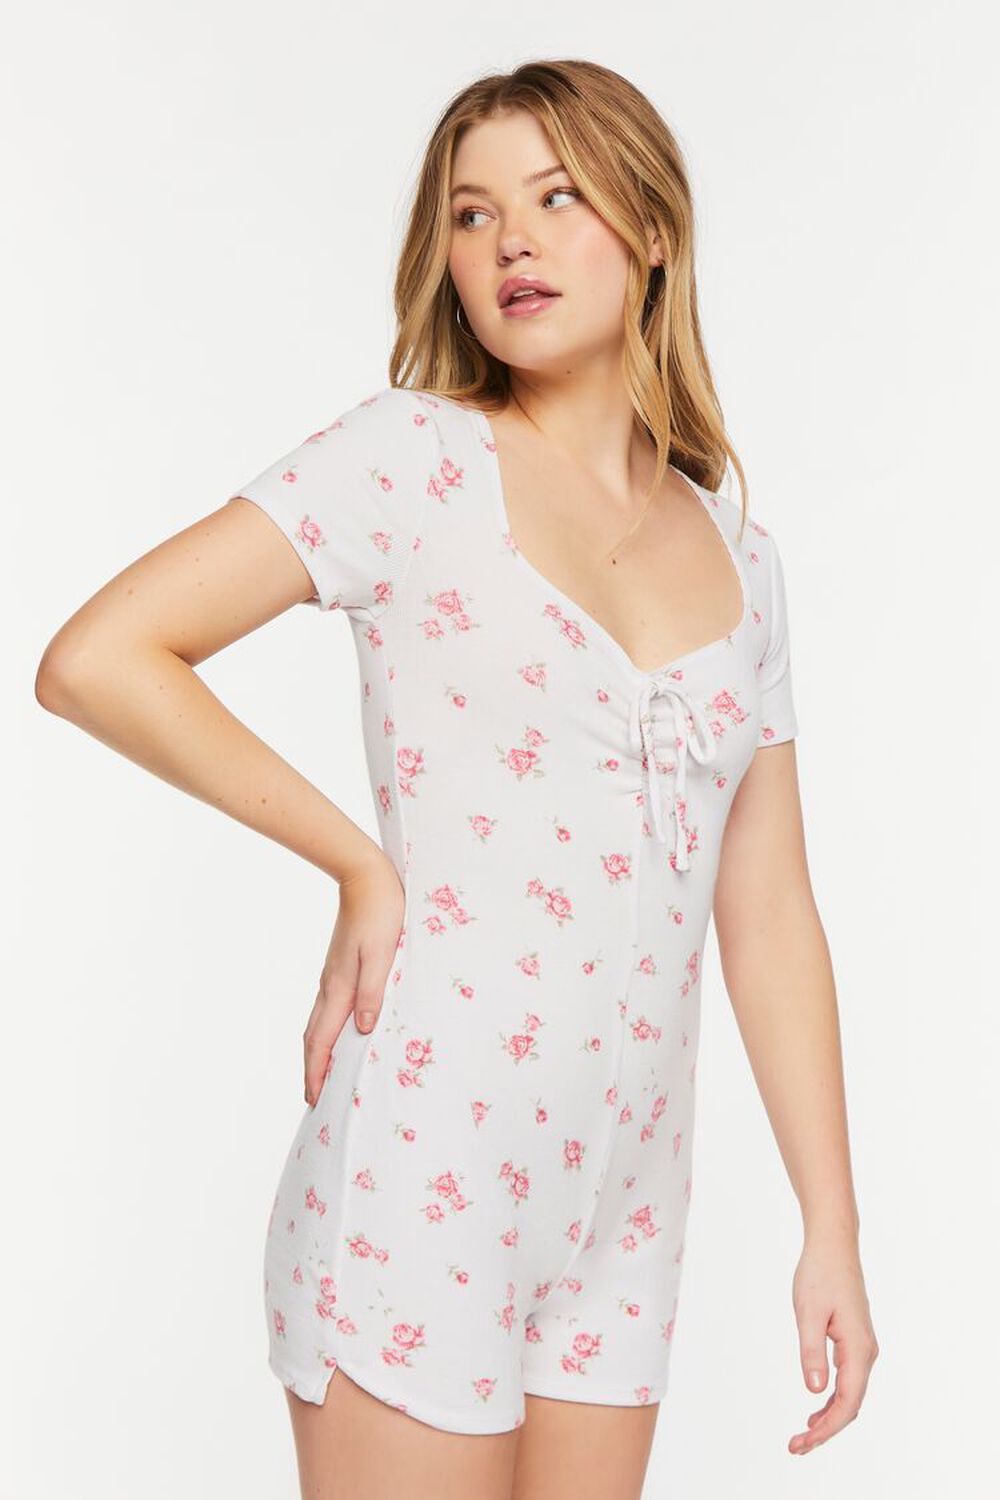 WHITE/PINK Rose Print Ruched Lounge Romper, image 3